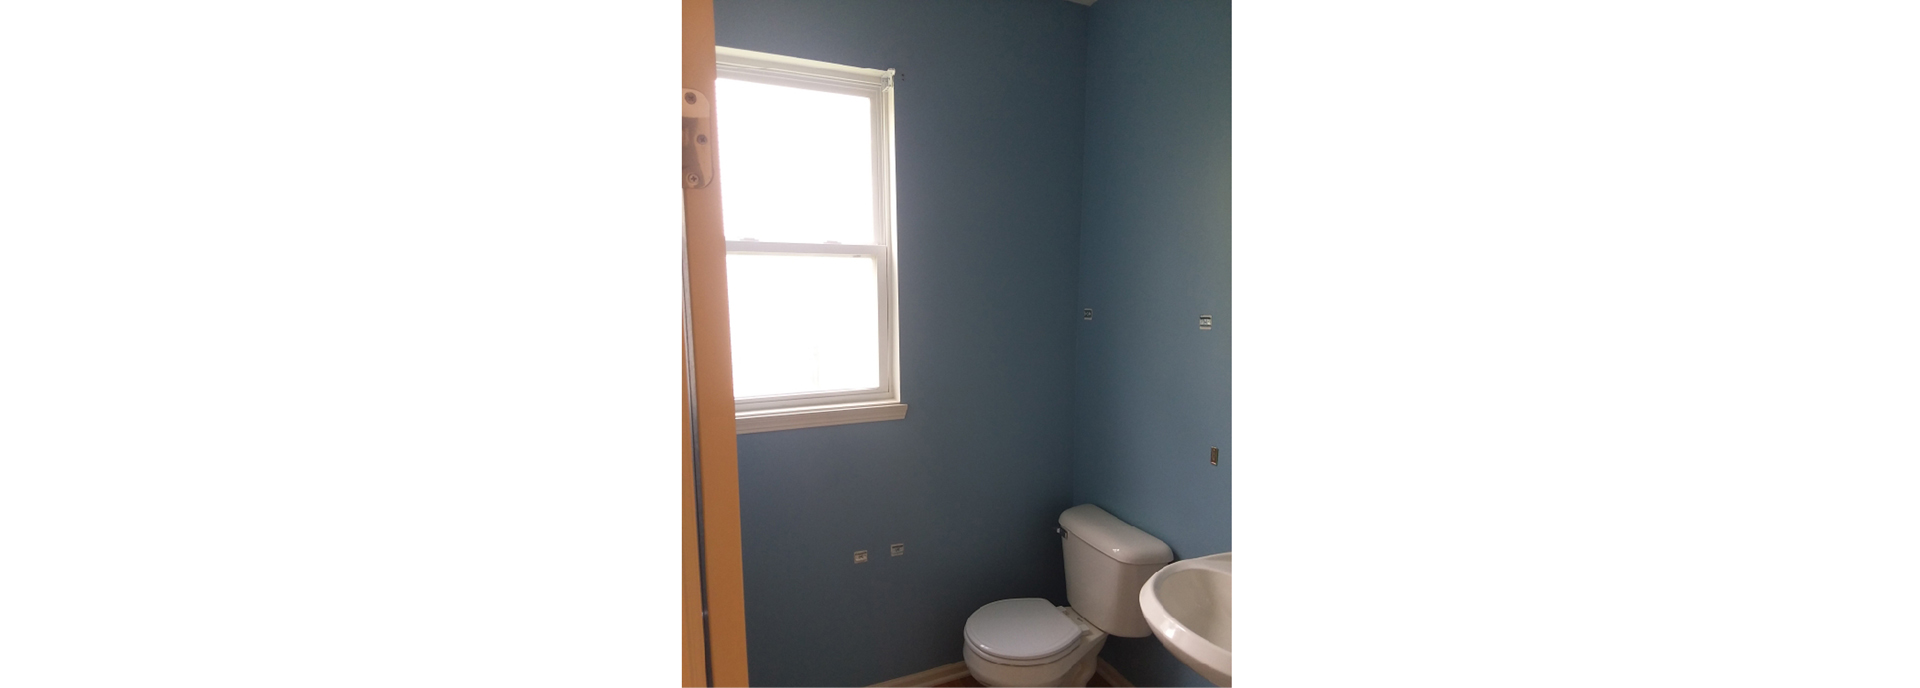 bathroom painting before and after - before - broadview heights